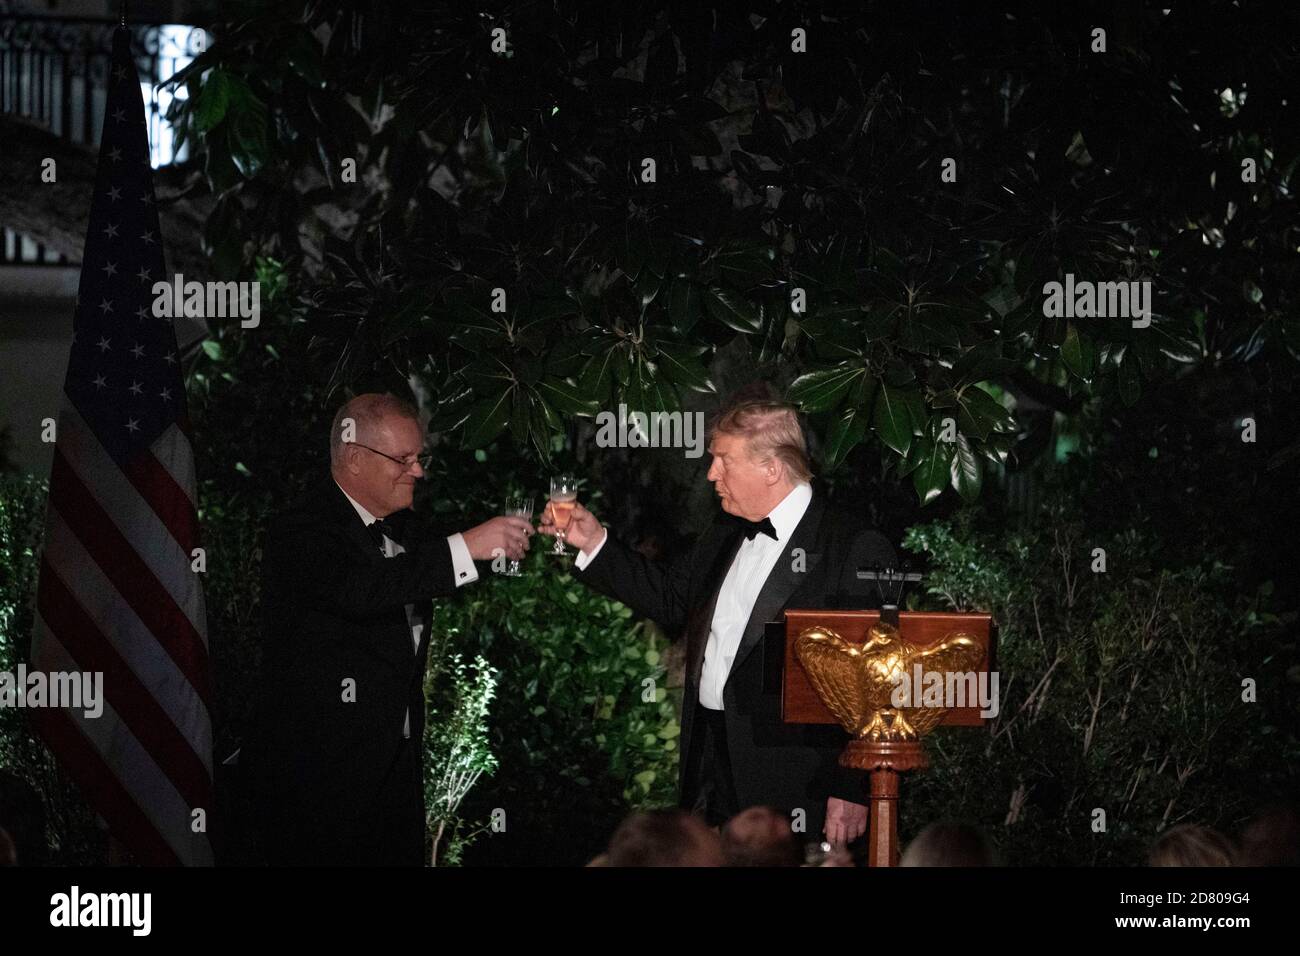 U.S. President Donald Trump and Australian Prime Minister Scott Morrison toast during a state visit at the White House on September 9th, 2019 in Washington, D.C. Credit: Alex Edelman/The Photo Access Stock Photo